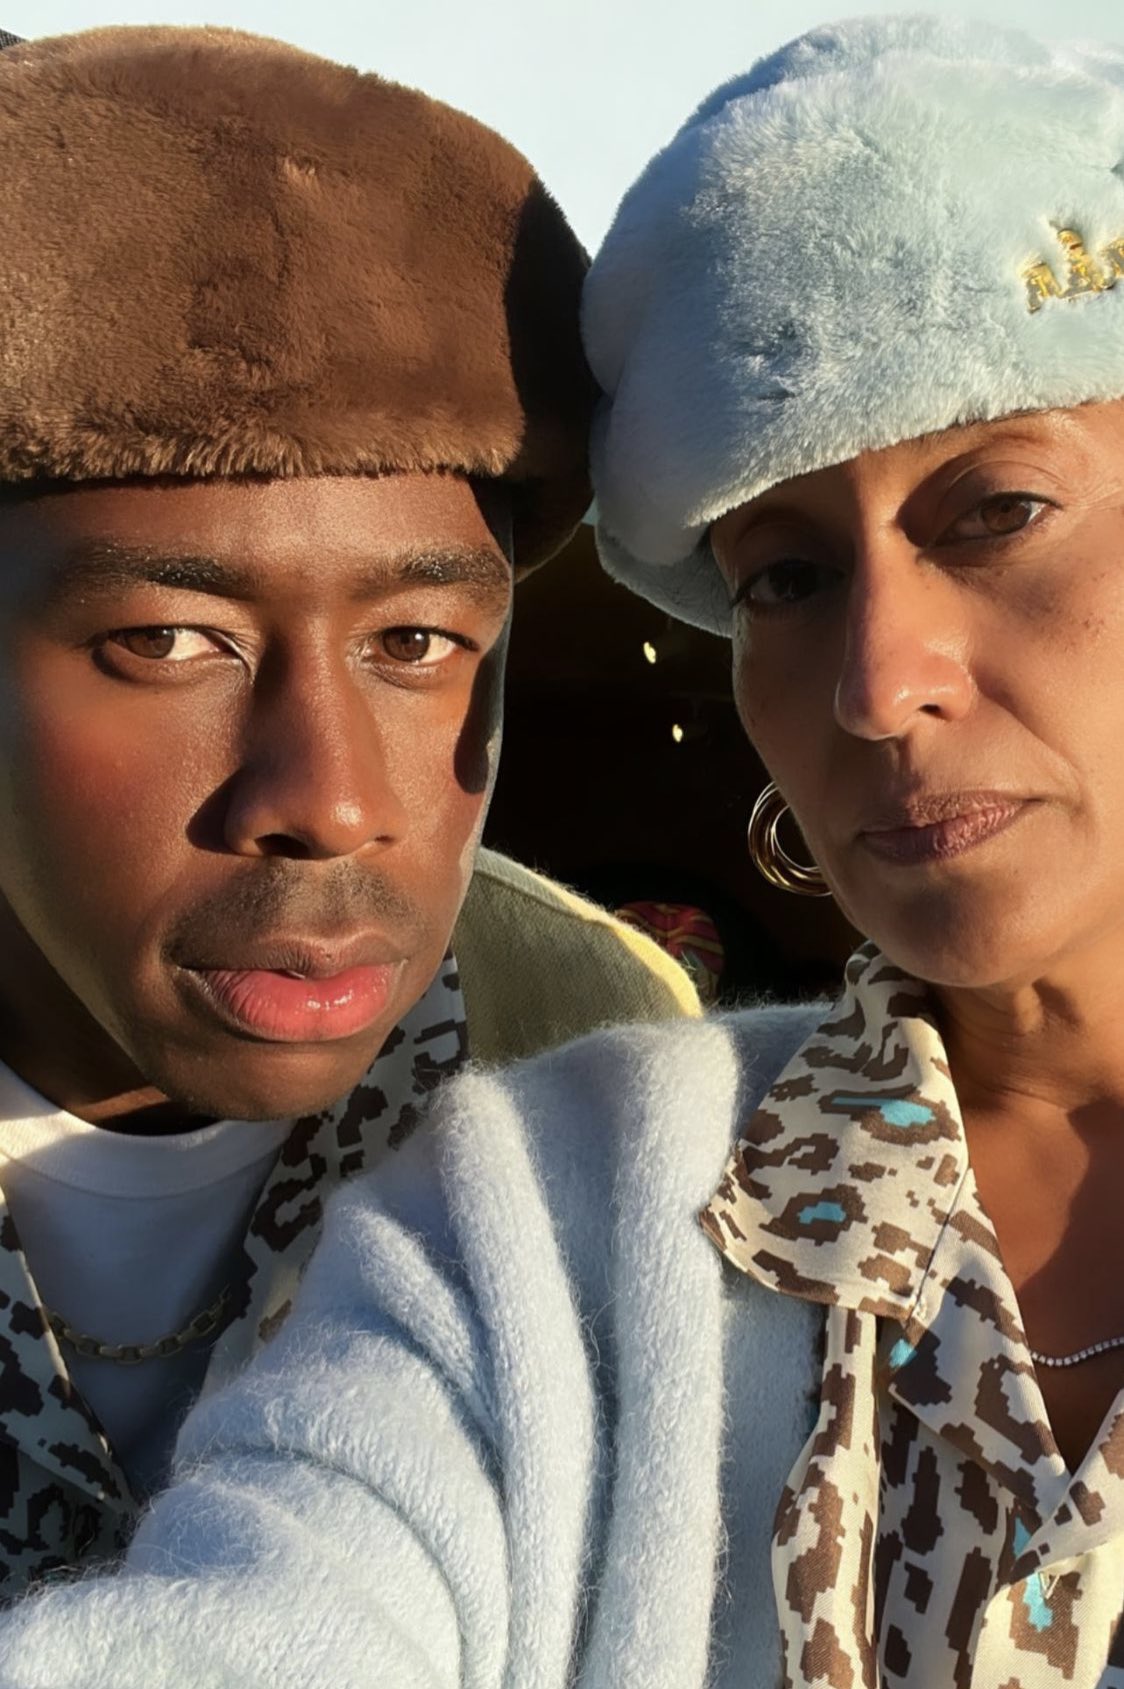 2Cool2Blog on X: Tracee Ellis Ross & Tyler The Creator link up at his  Lefleur fragrance pop up shop  / X